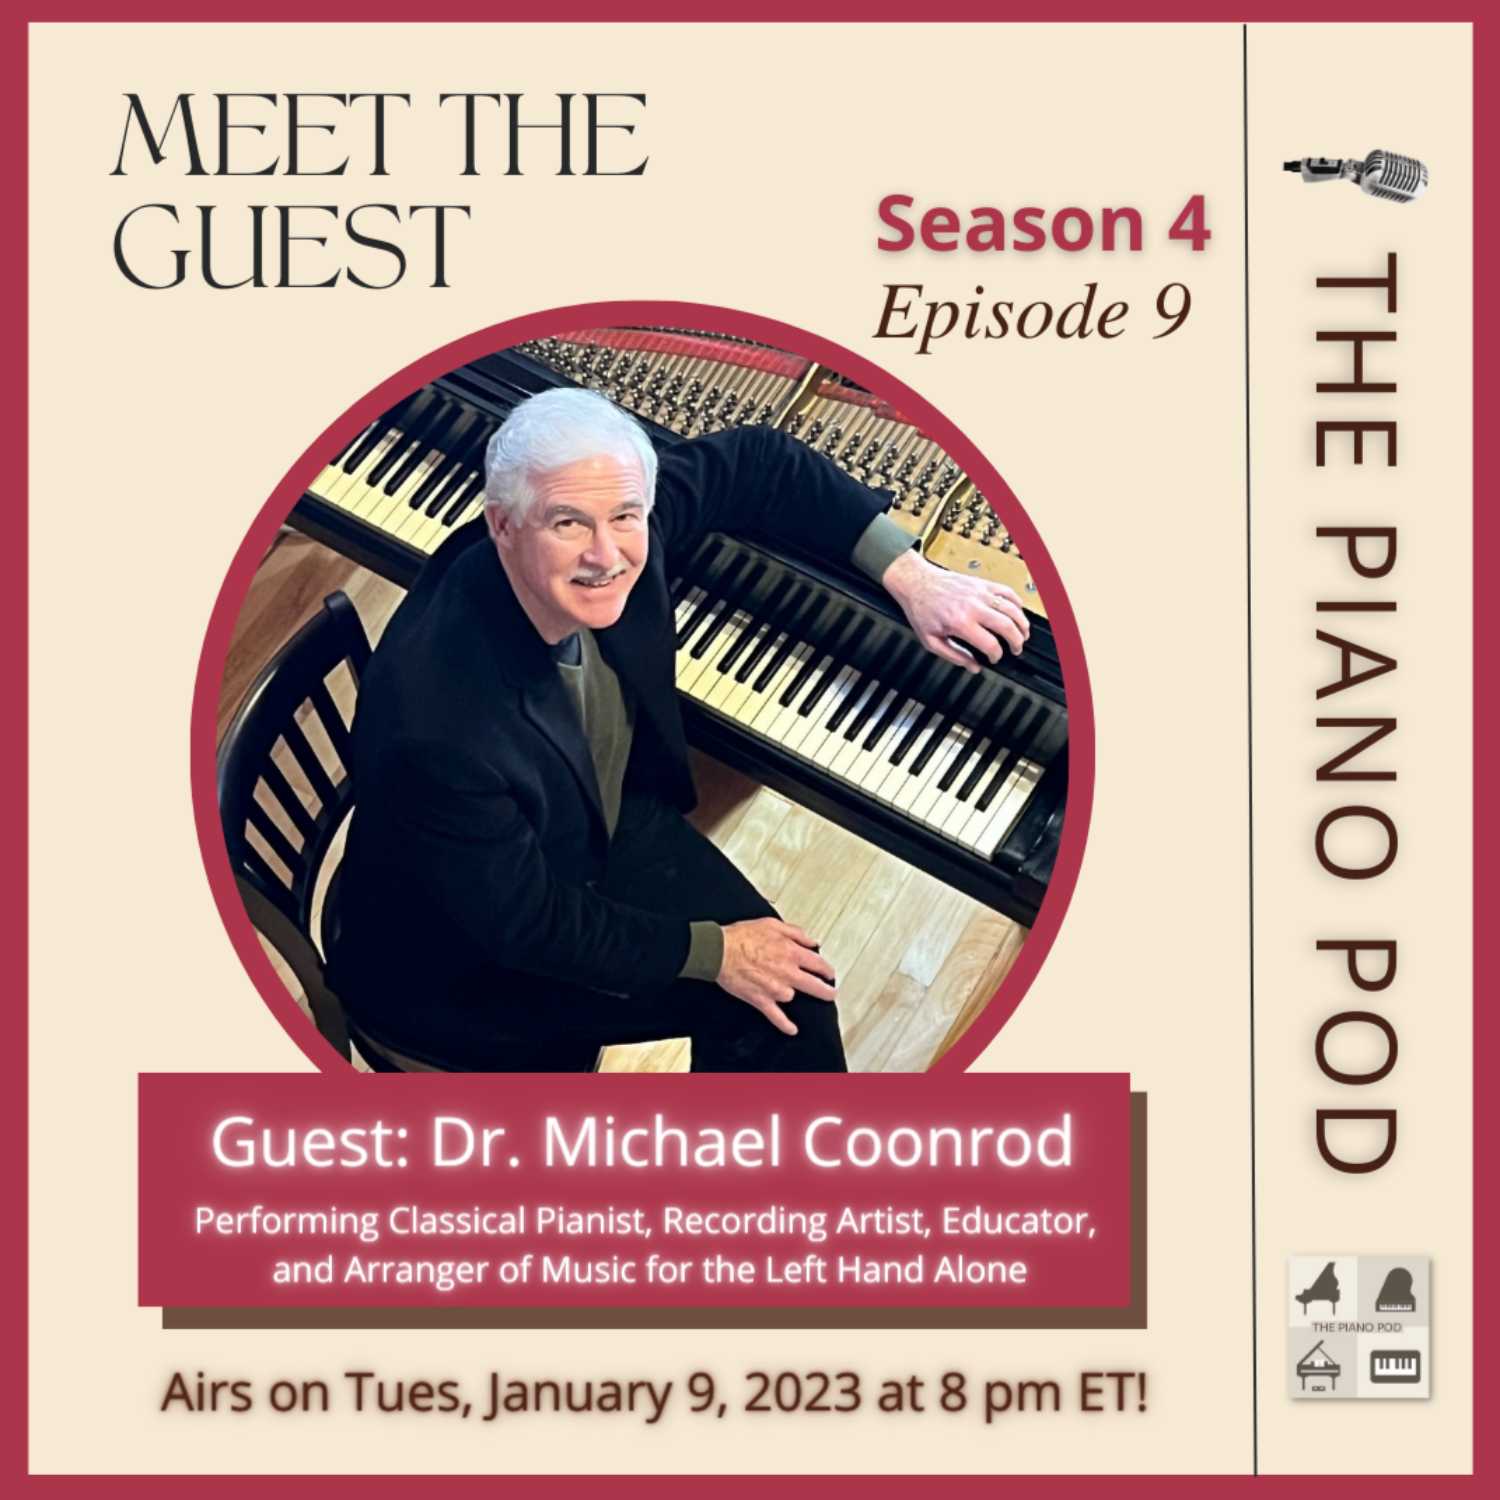 Trailer for Season 4 Episode 9: Dr. Michael Coonrod -- Classical Pianist, Recording Artist, Educator and Arranger of Music for the Left Hand Alone